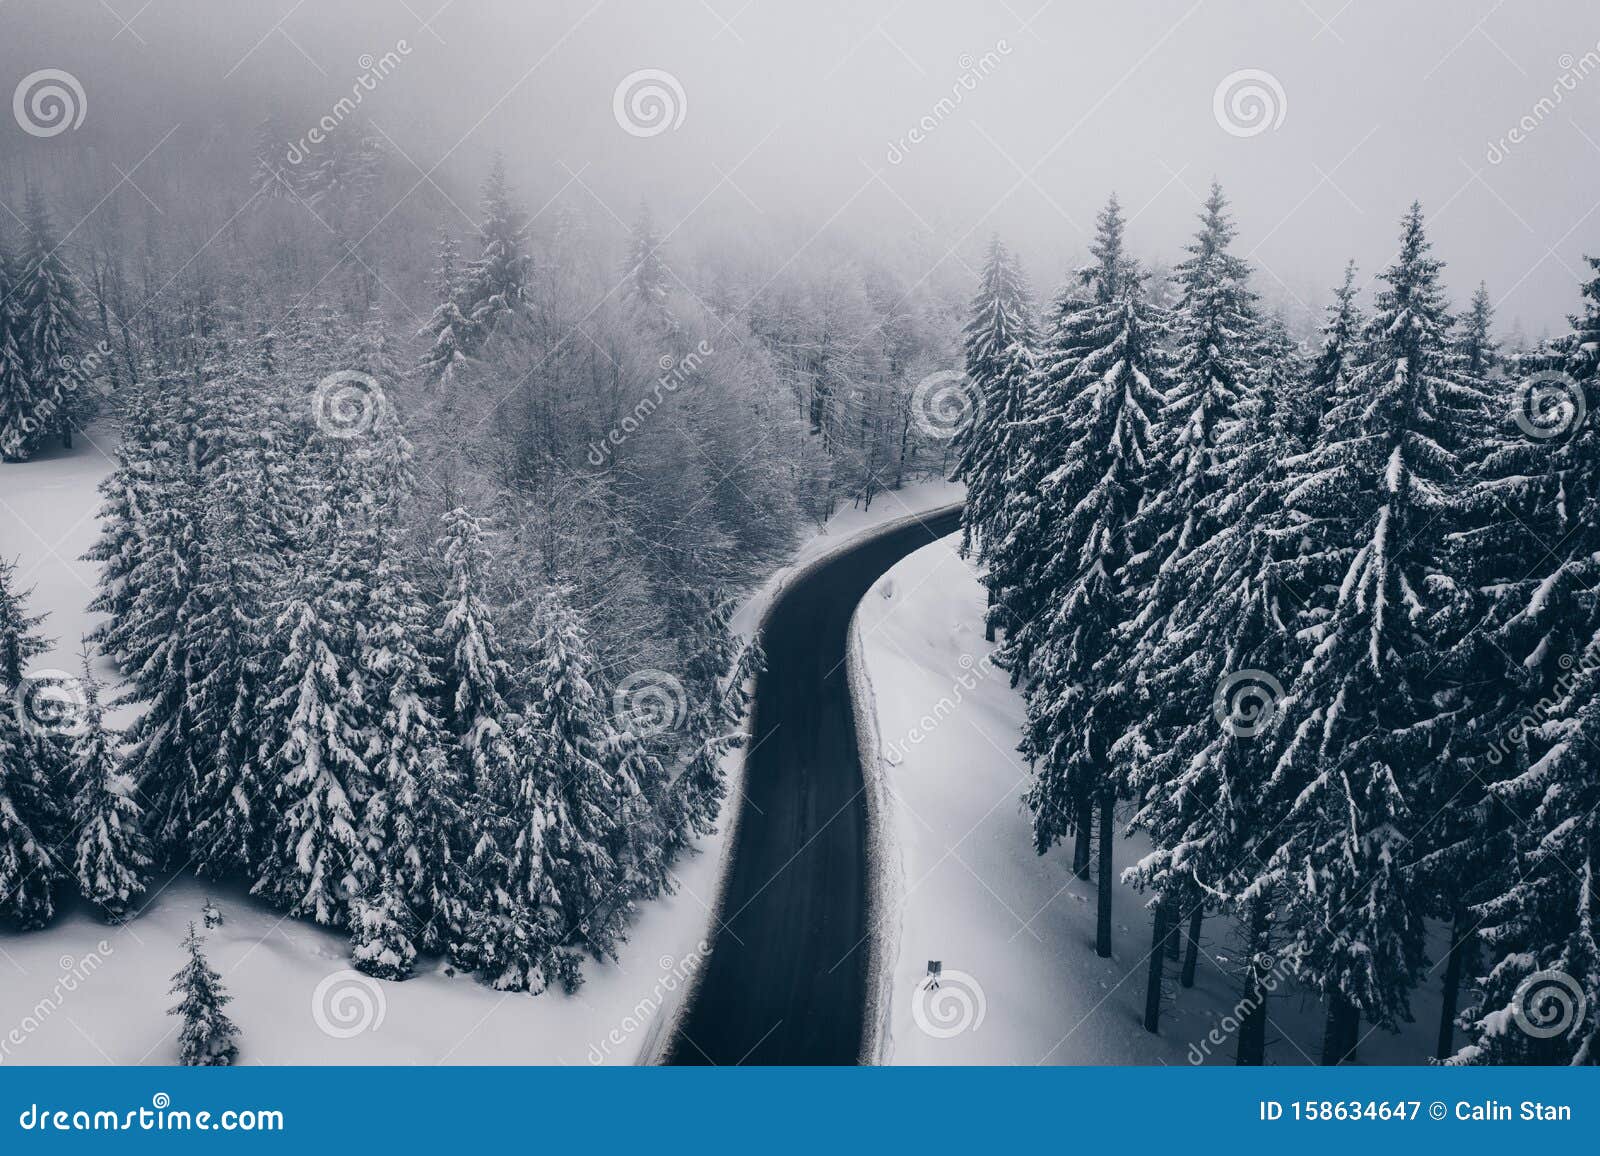 mysterious winter road in the forest. aerial view the a winding mountain road at cheia, romania